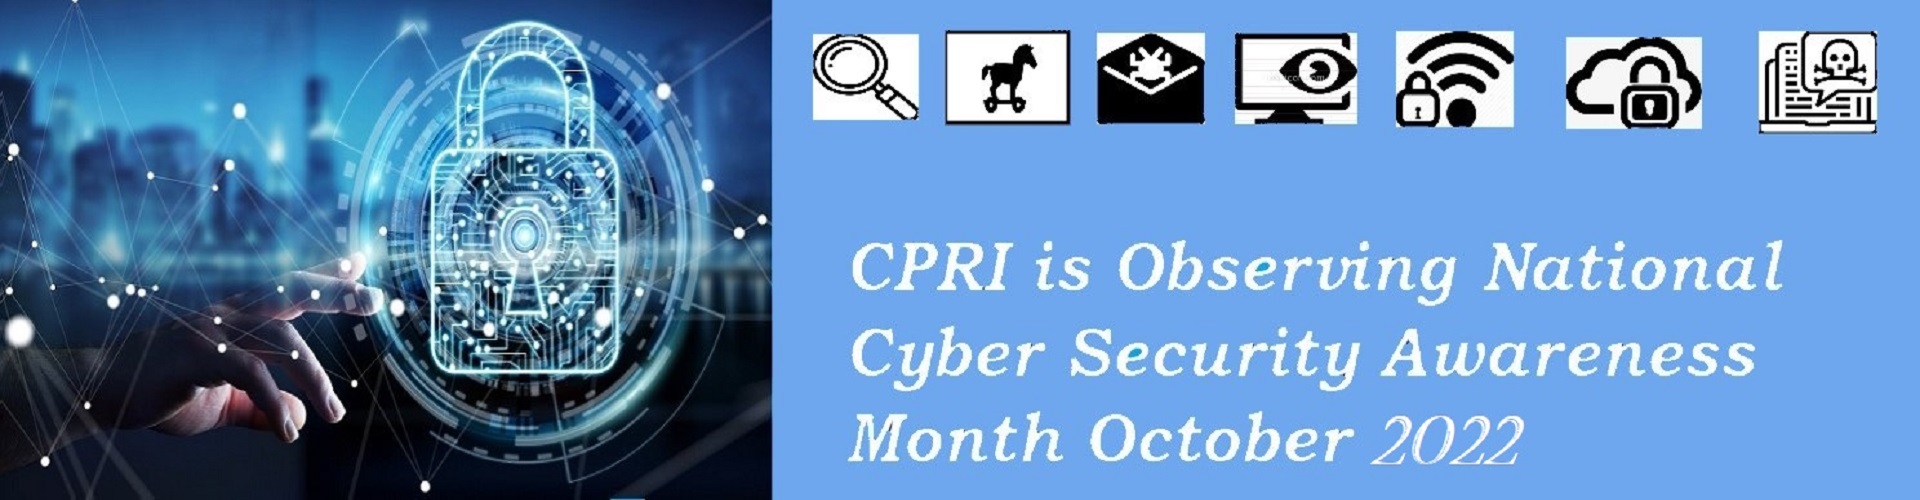 National Cyber Security Awareness Month October 2022